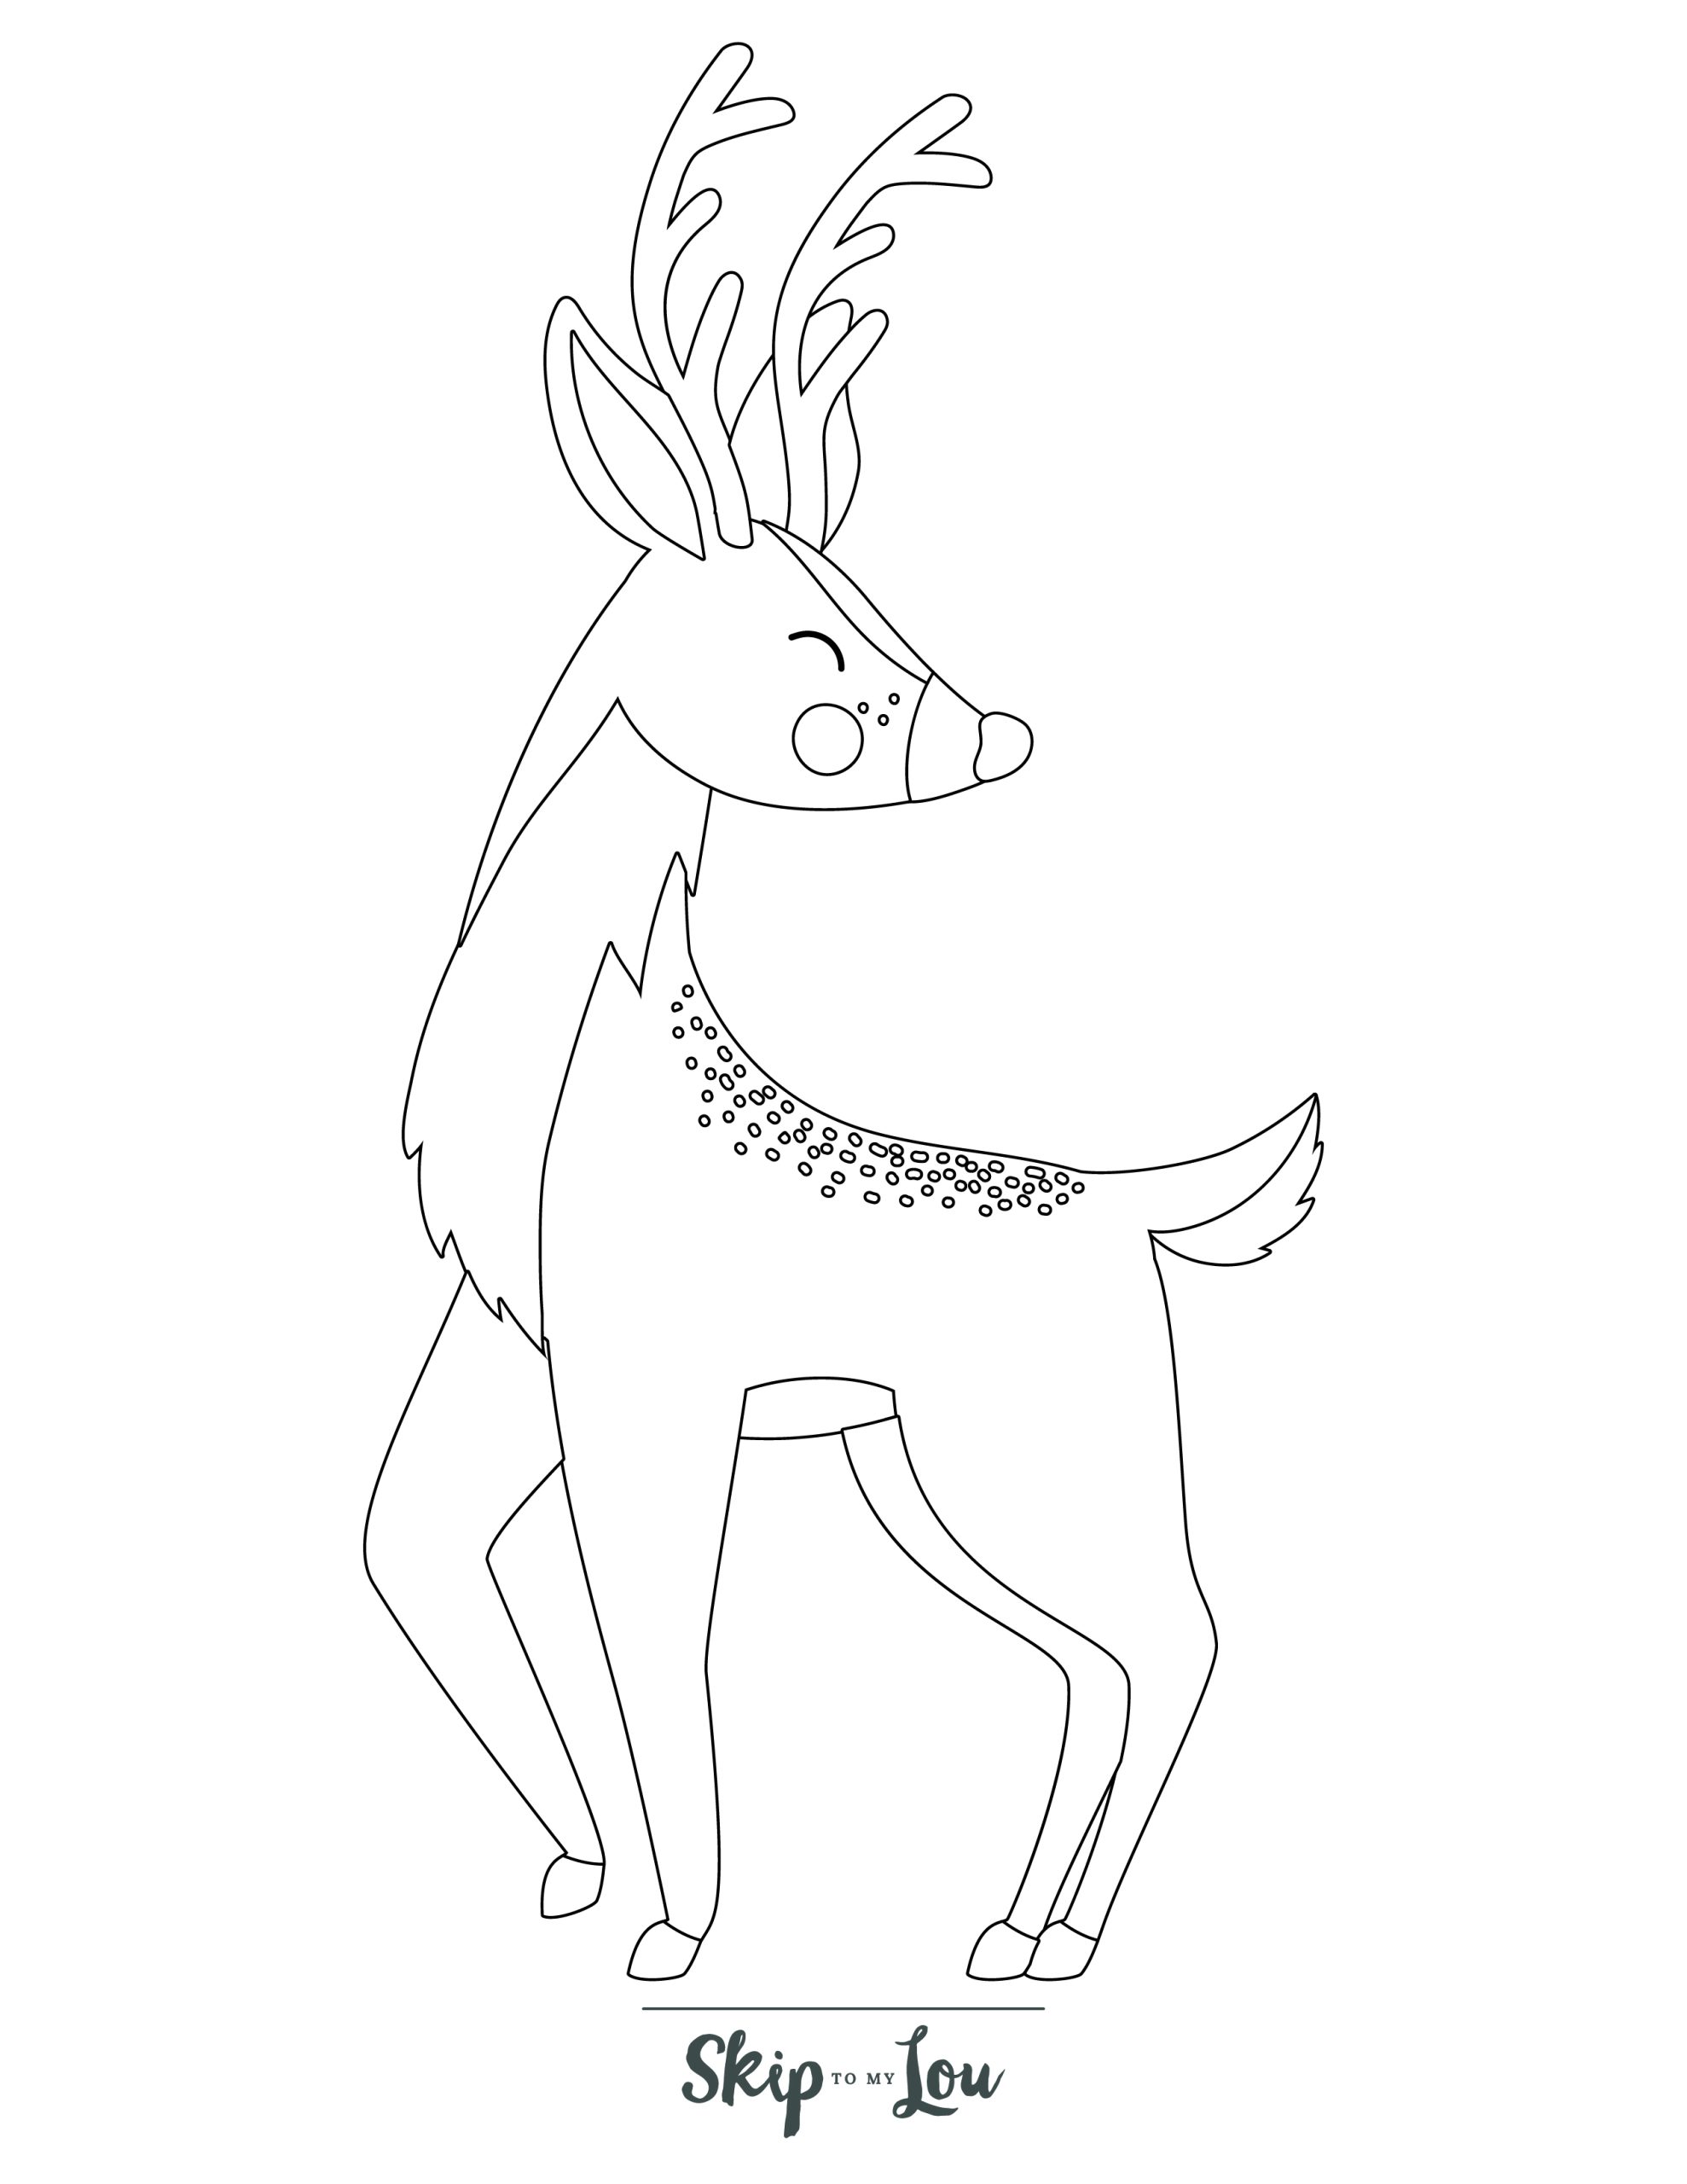 Reindeer Coloring Page 1 - Line drawing of a tall, realistic reindeer 